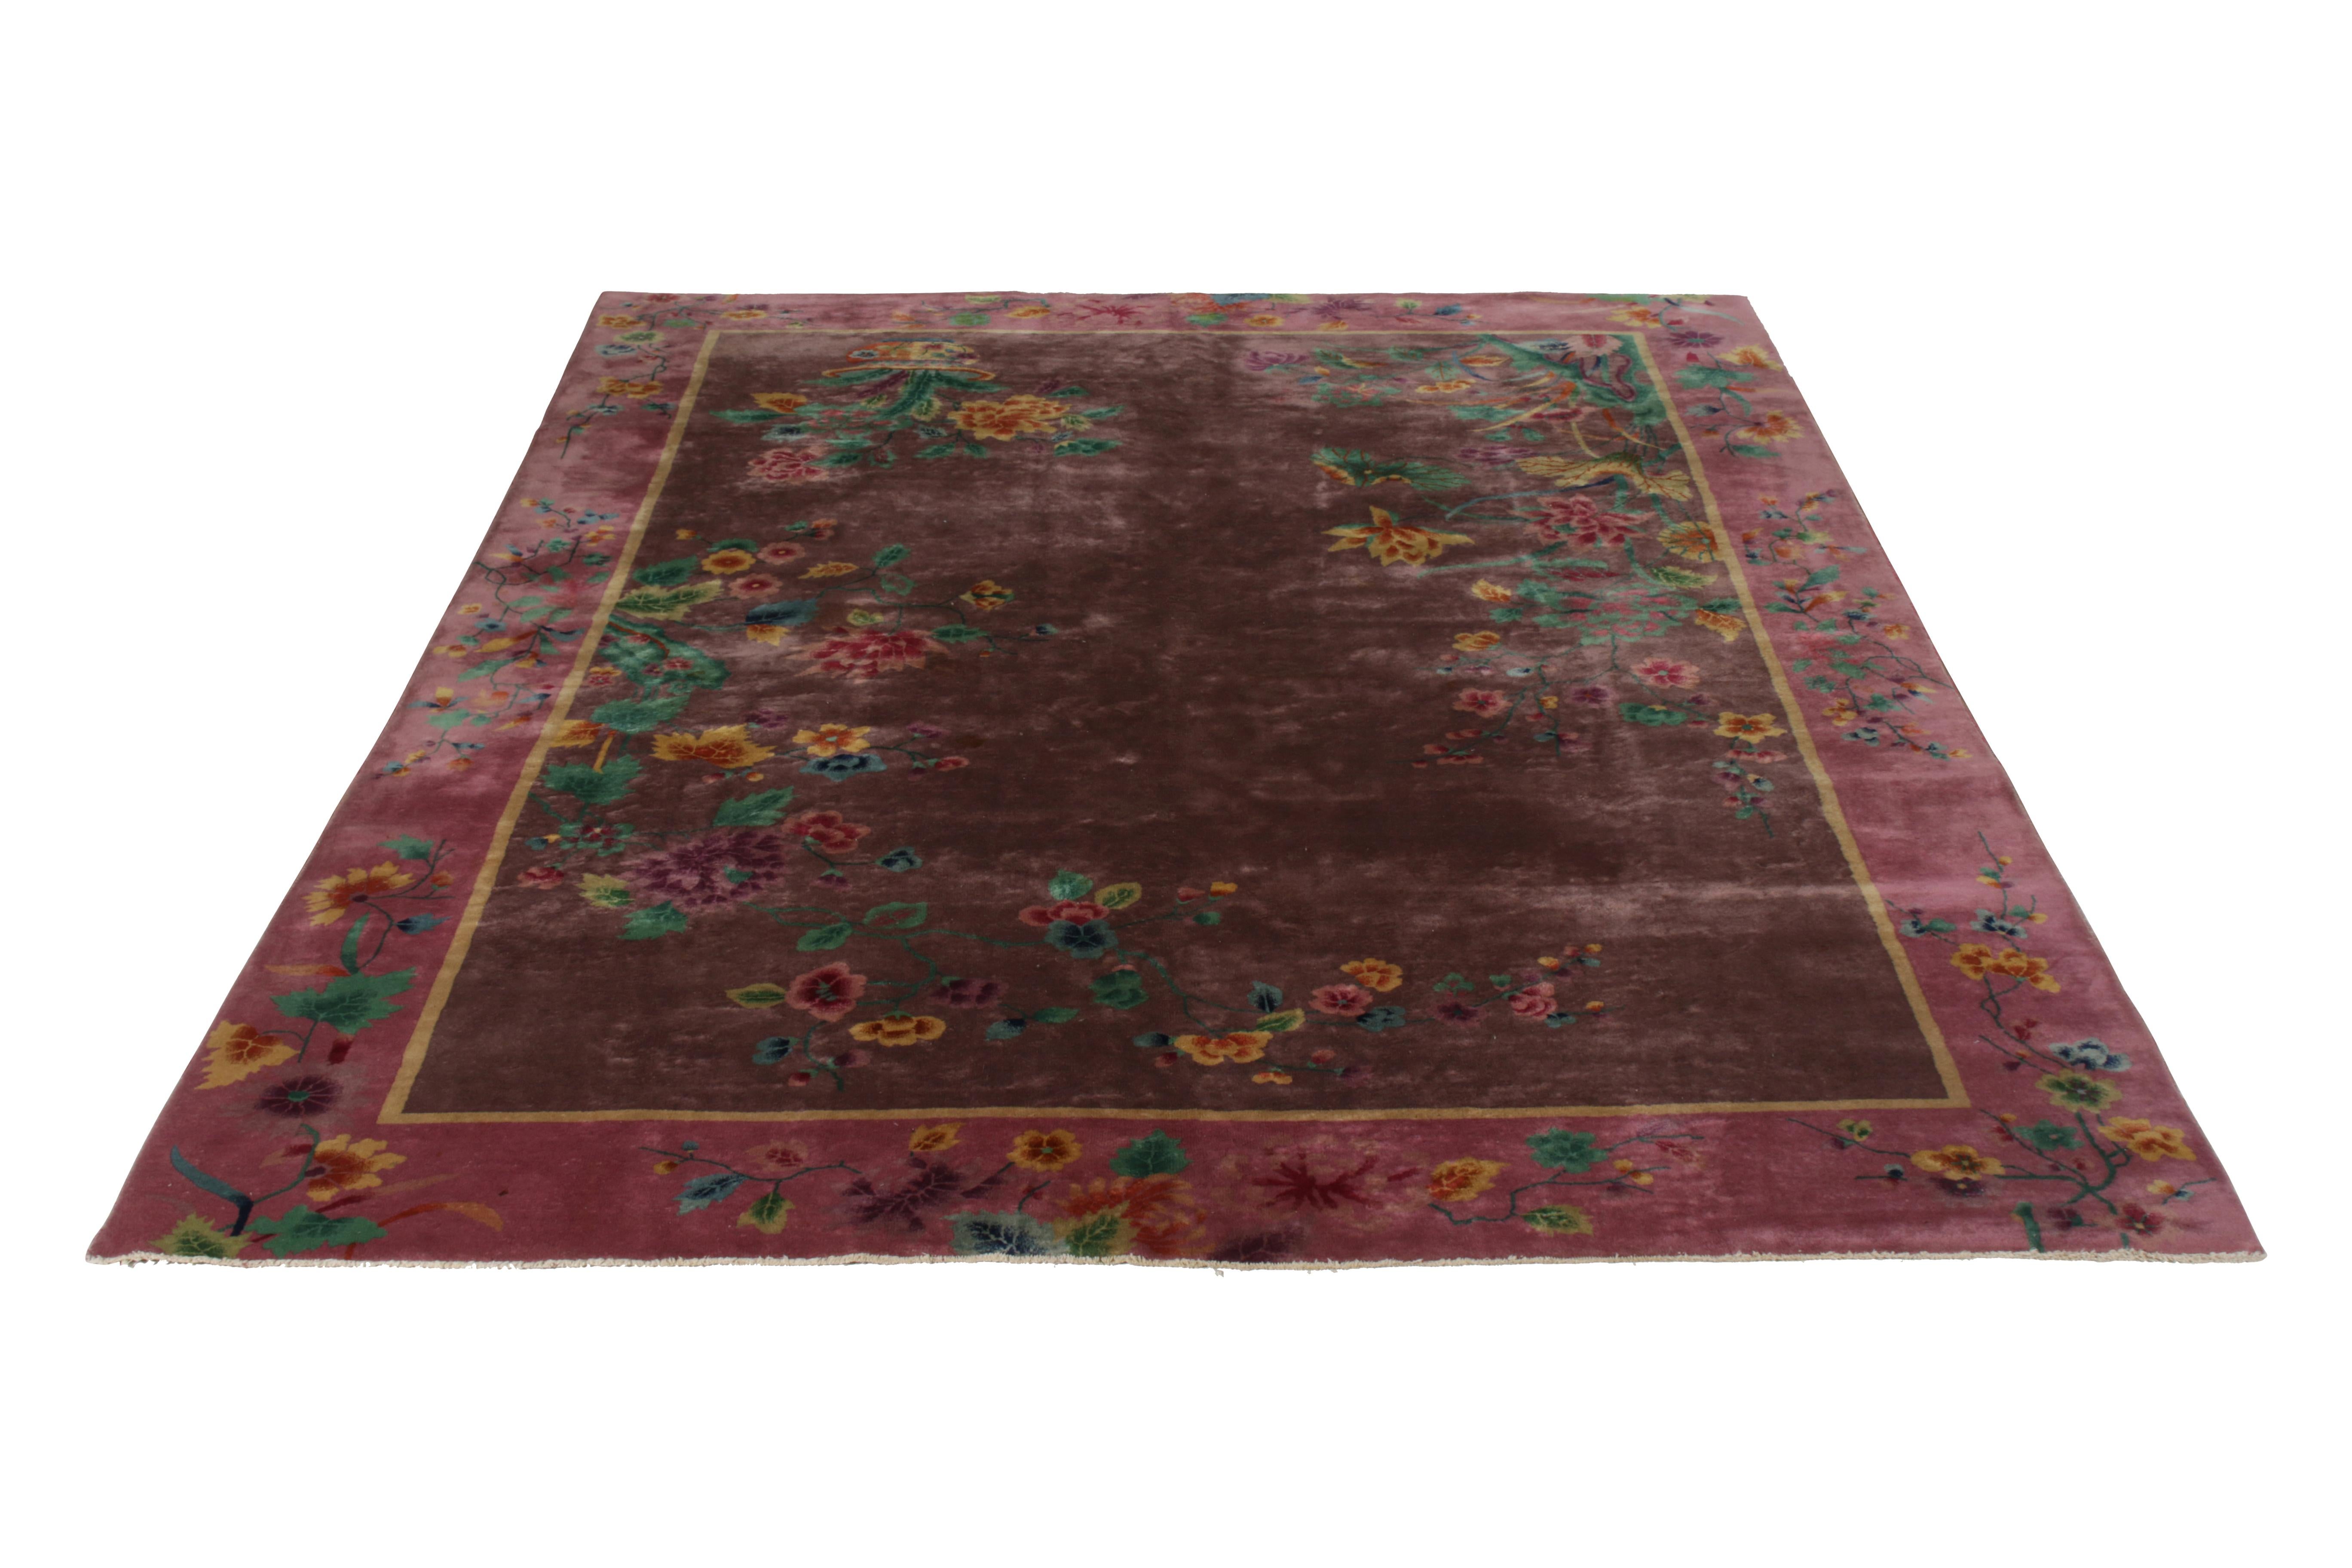 This antique purple wool and silk rug has a deco style from China, made apparent in its imagery. From 1920, the all-over field design is accented by highly stylized vases with flowers, where the bulk of the silk was woven to draw the eye to their